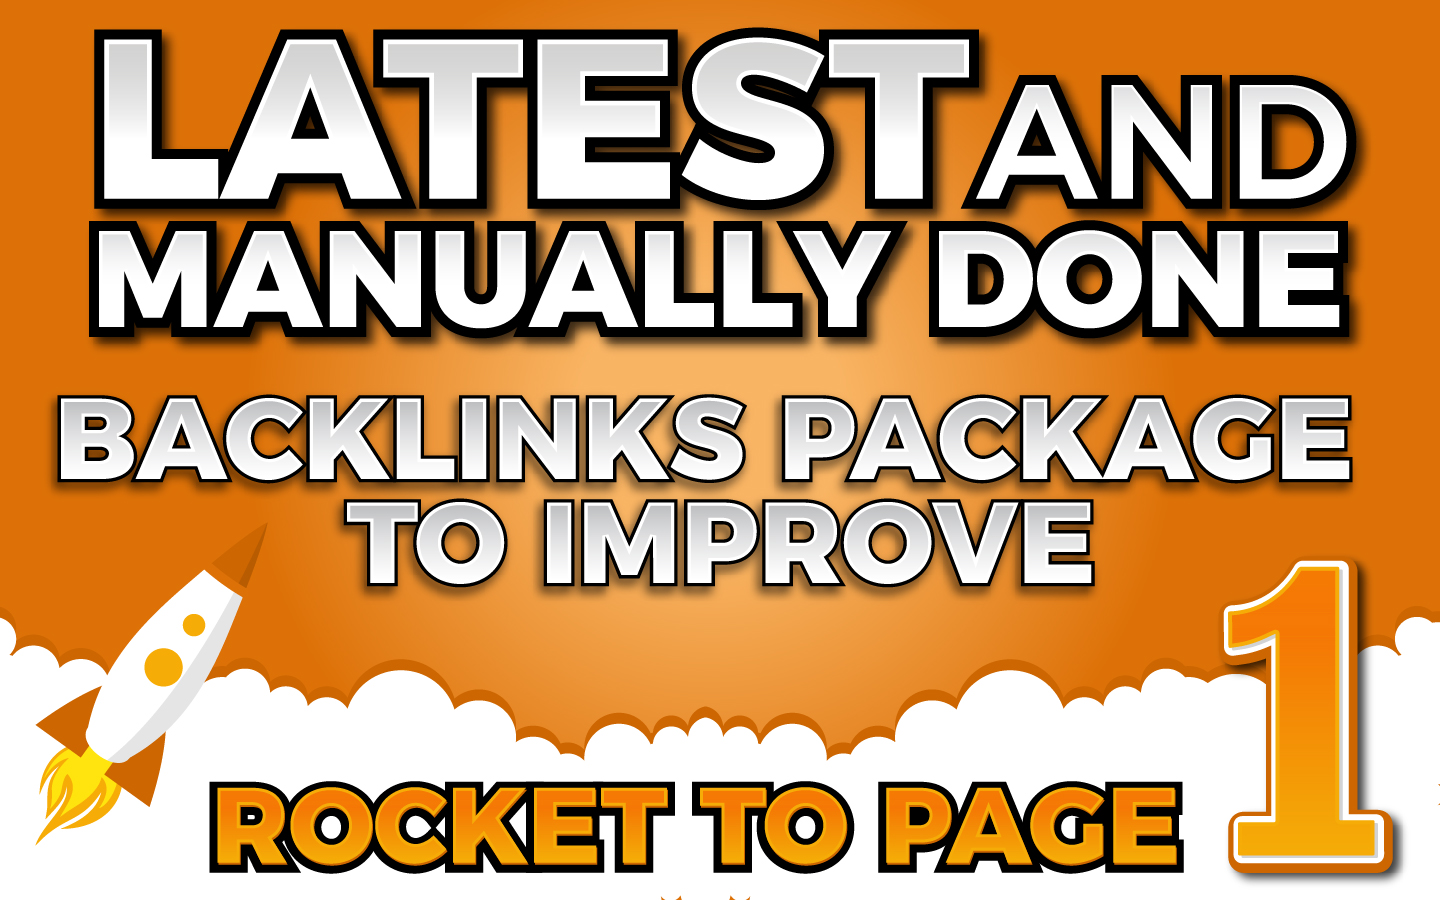 Latest And Manualy Done Back-links Package To Improve Your Ranking Toward Page 1